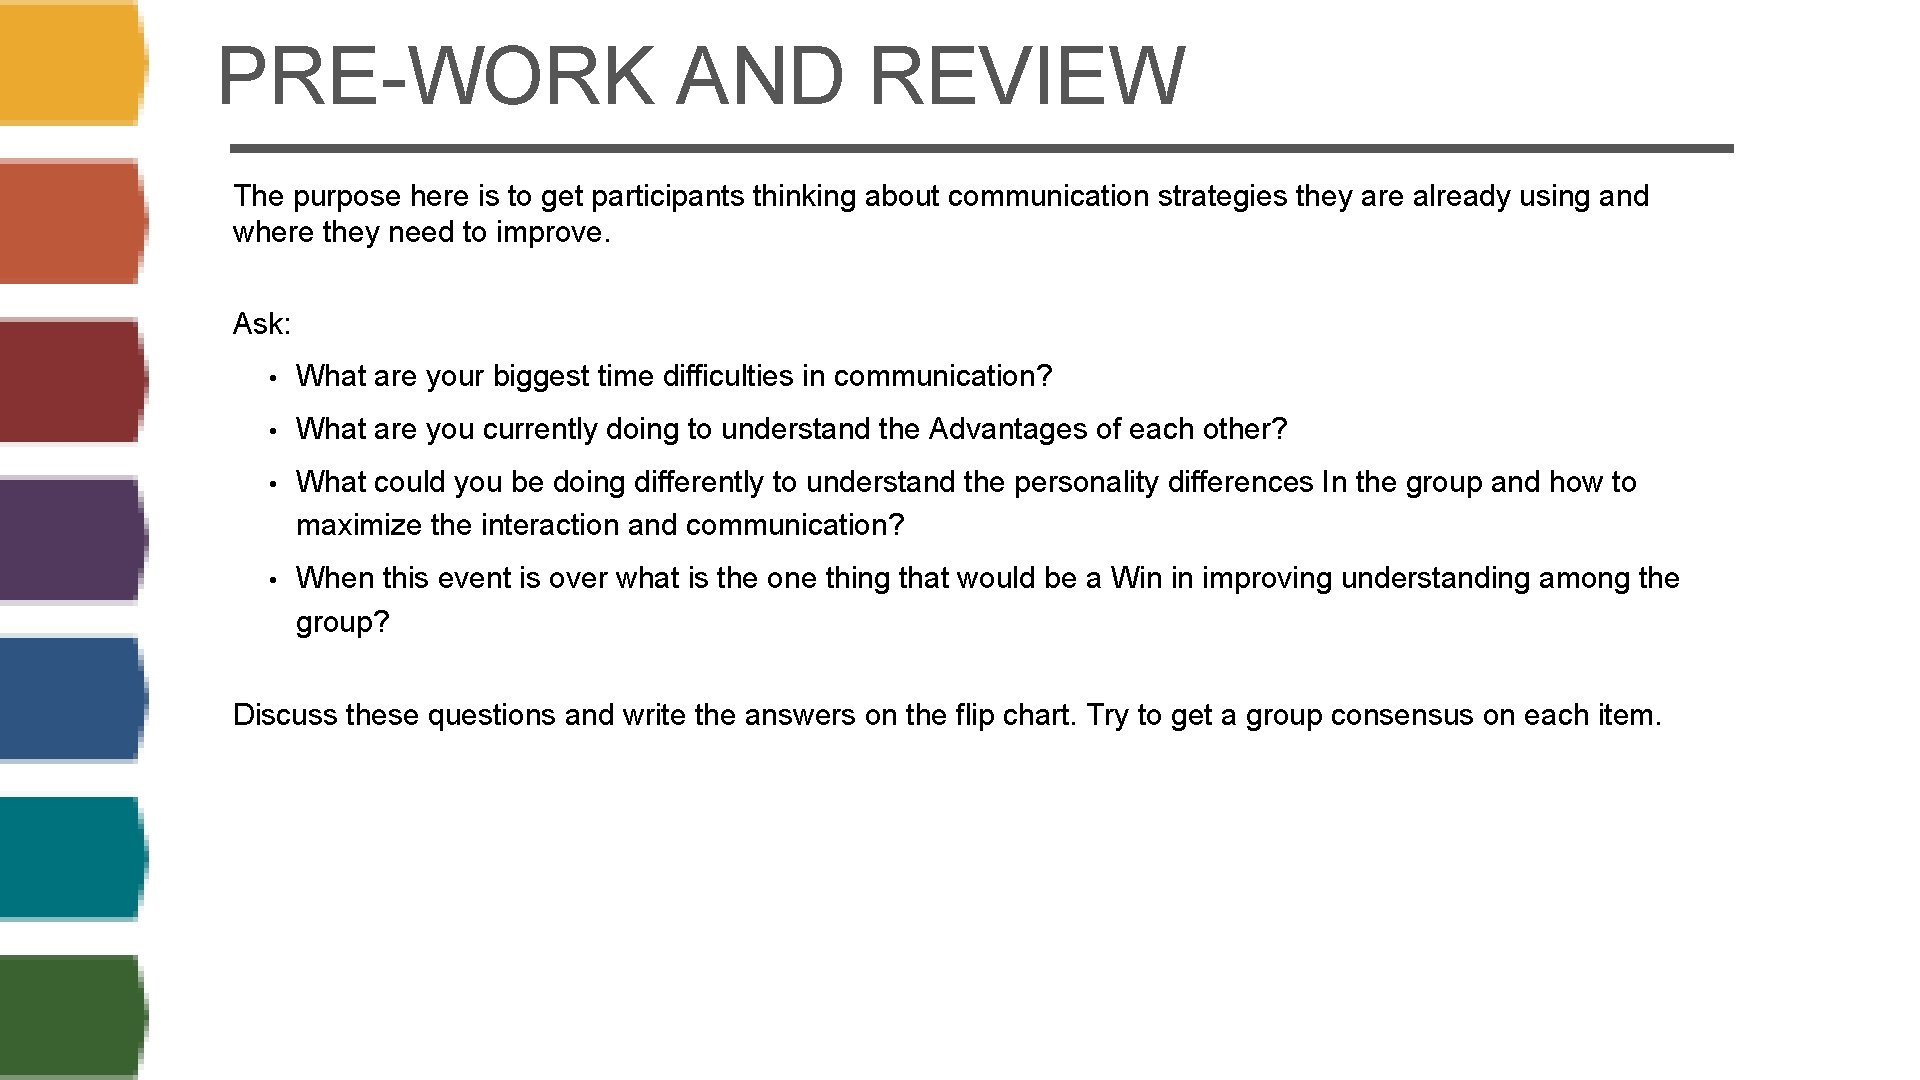 PRE-WORK AND REVIEW The purpose here is to get participants thinking about communication strategies